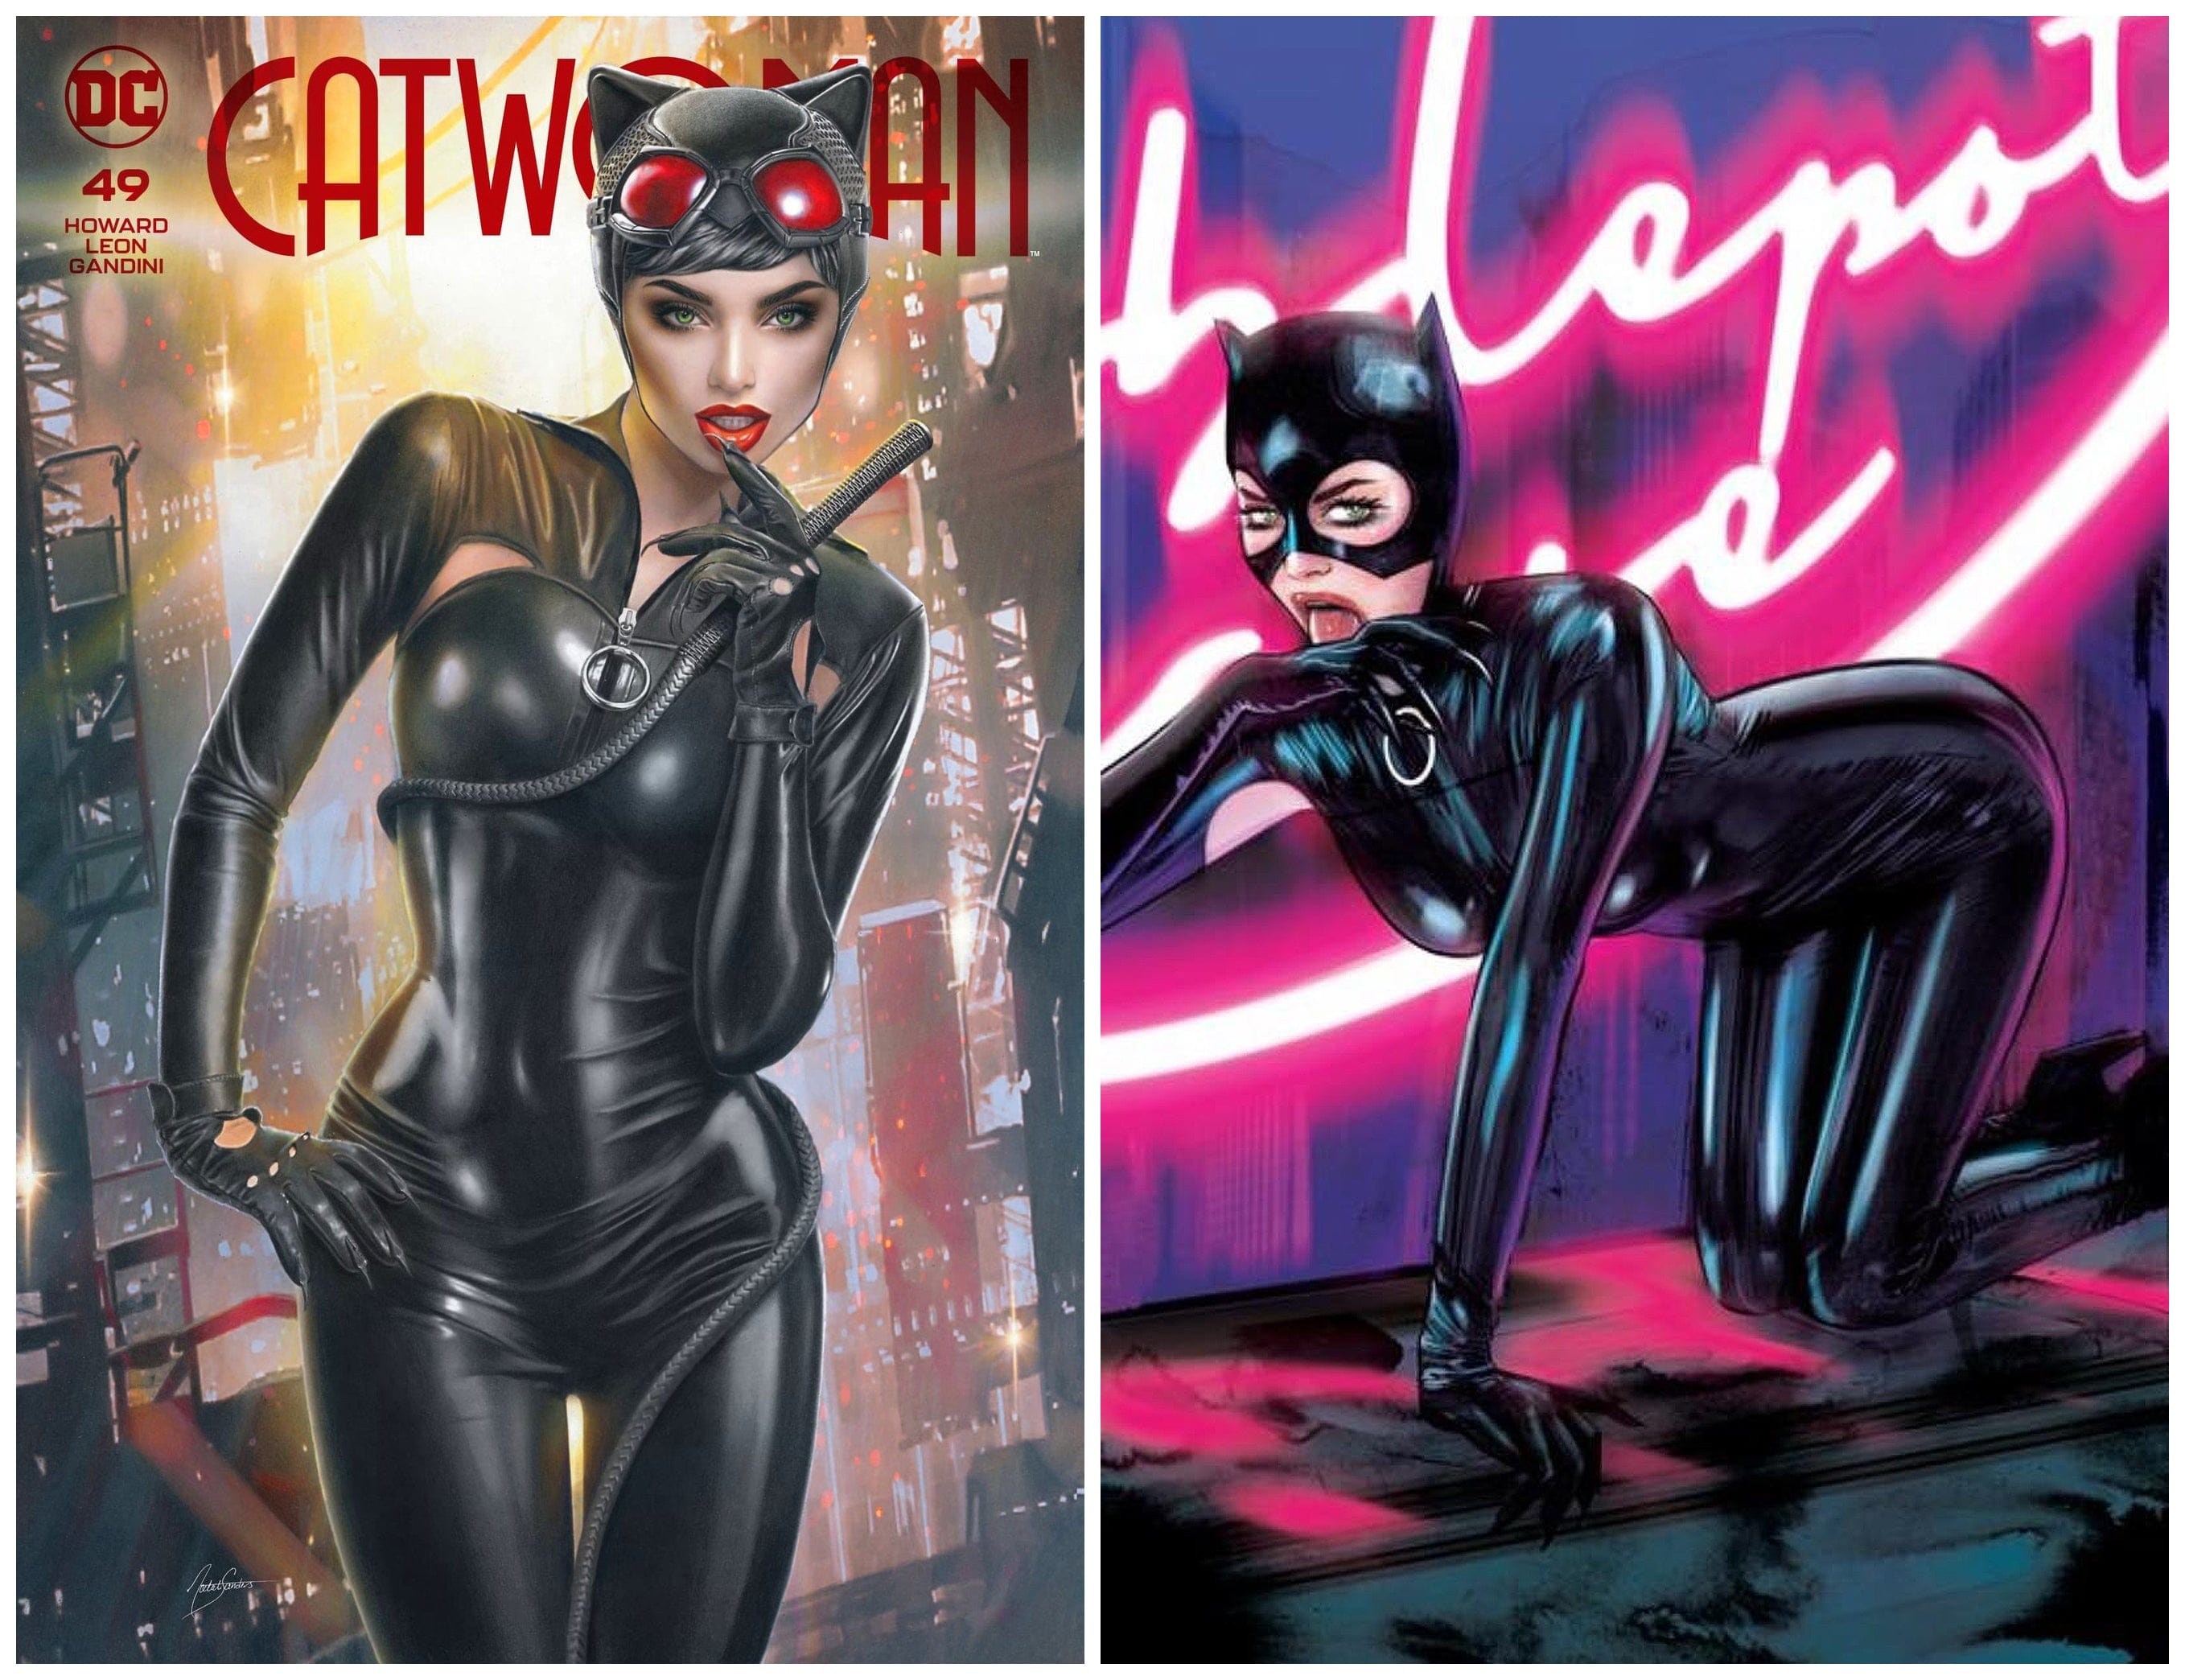 catwoman comic covers